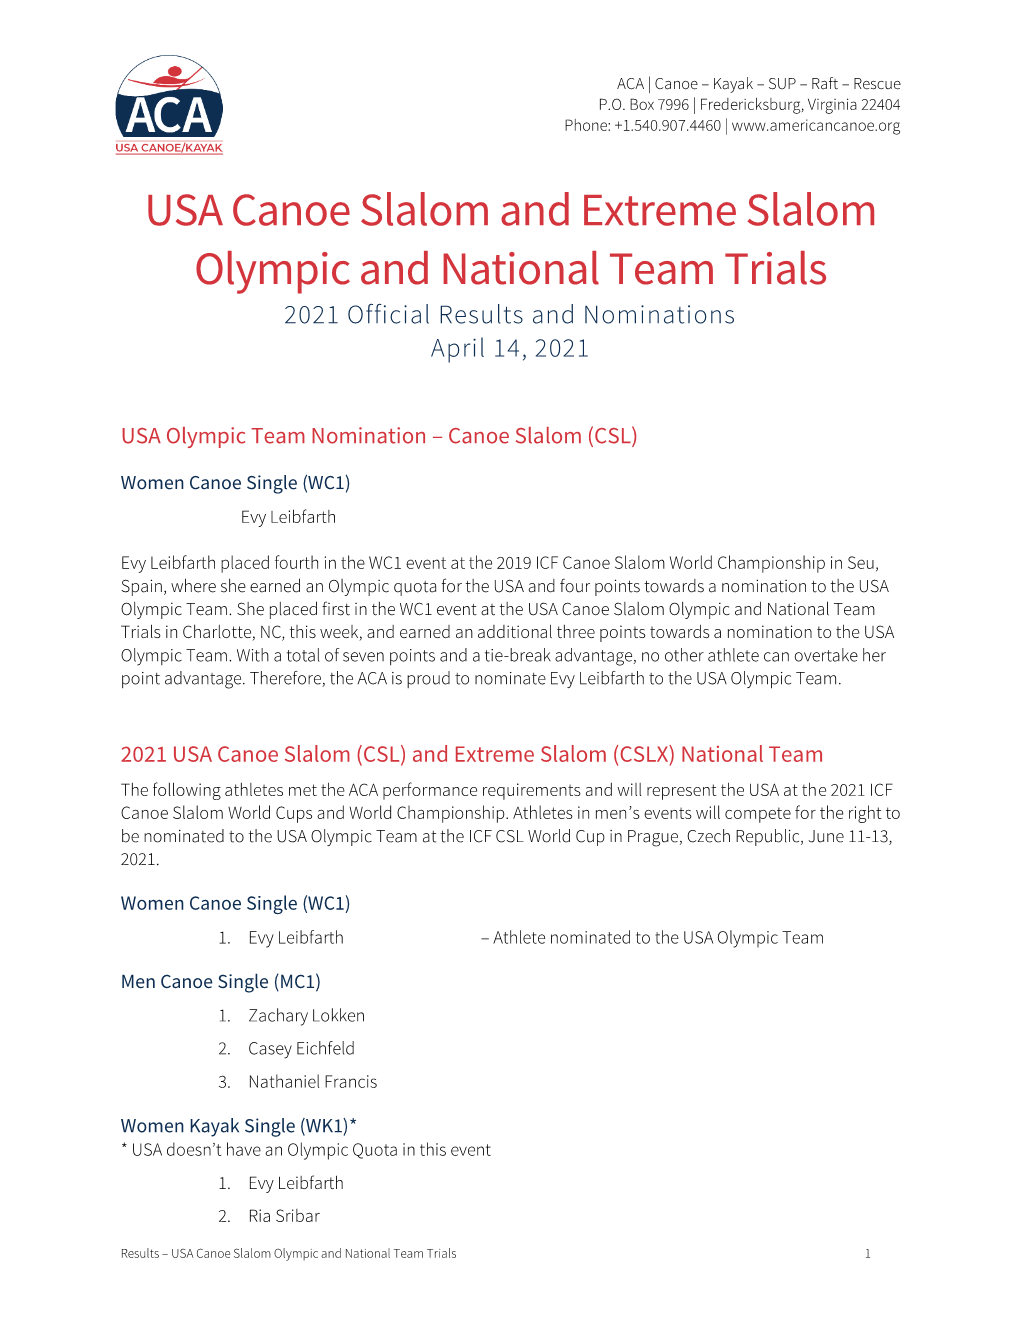 USA Canoe Slalom and Extreme Slalom Olympic and National Team Trials 2021 Official Results and Nominations April 14, 2021